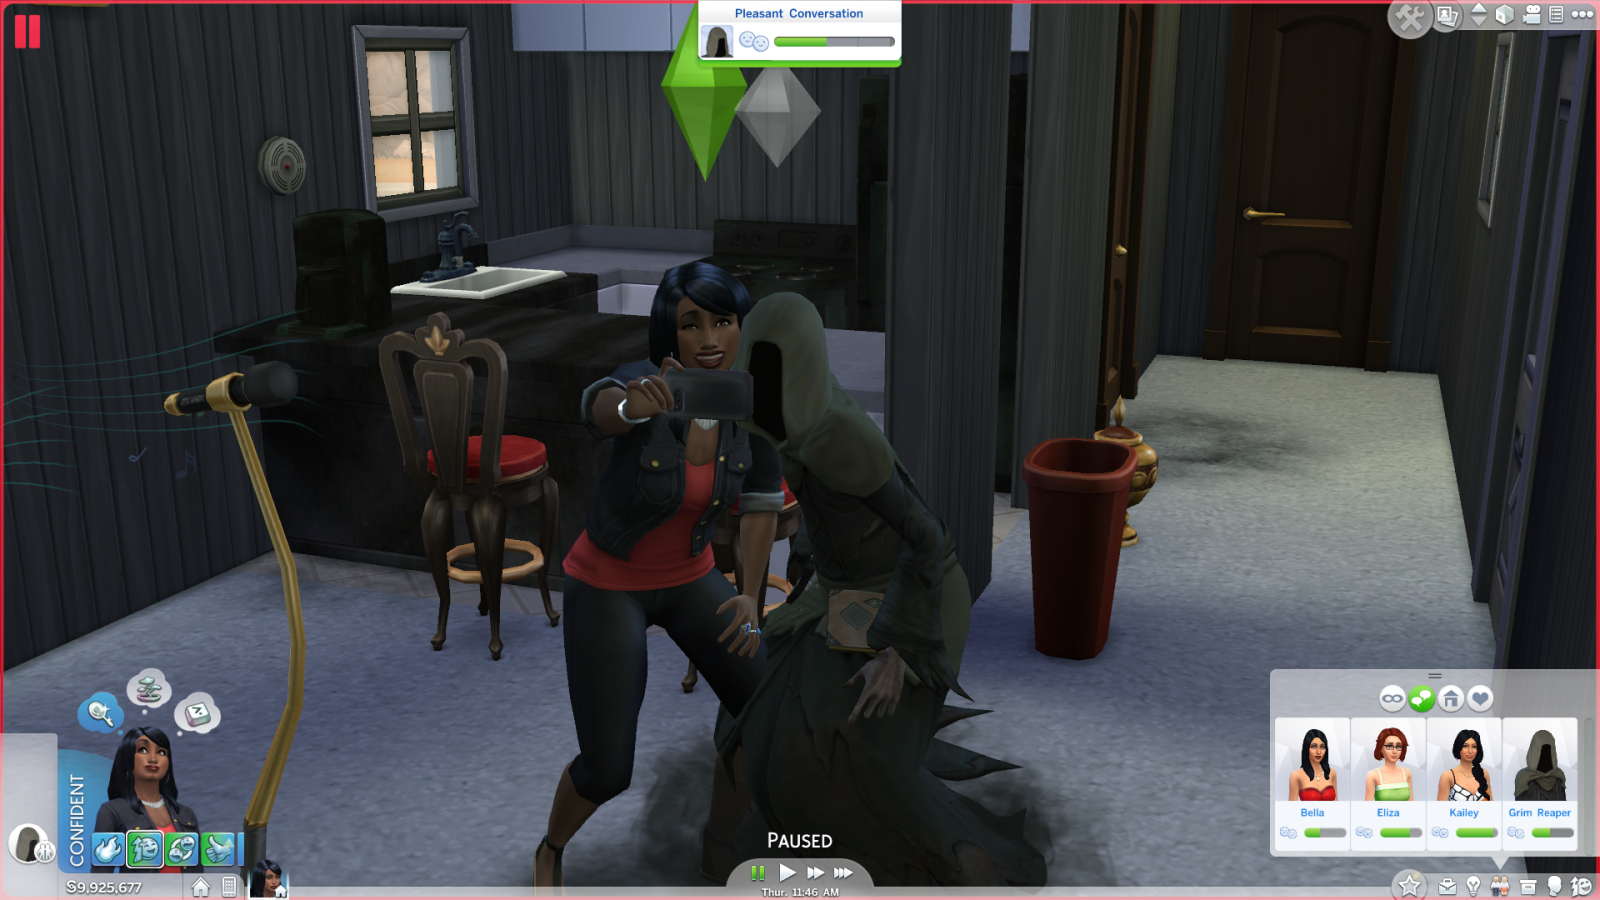 The Sims 4 Grim Reaper Taking a Selfie